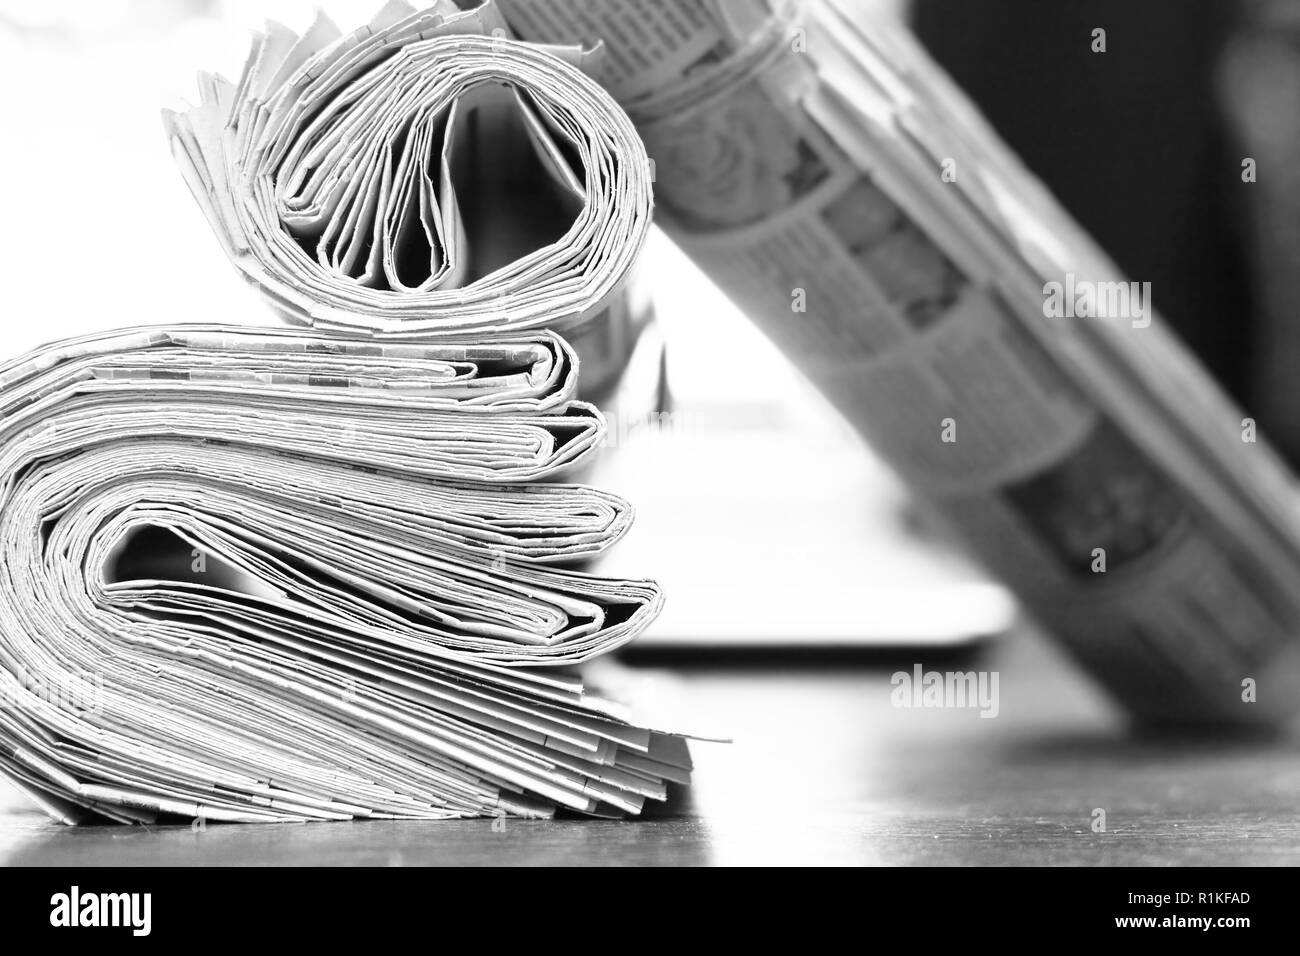 Newspapers and computer. Folded and rolled papers and magazines on table in front of open laptop. Concept for news, different sources of information Stock Photo